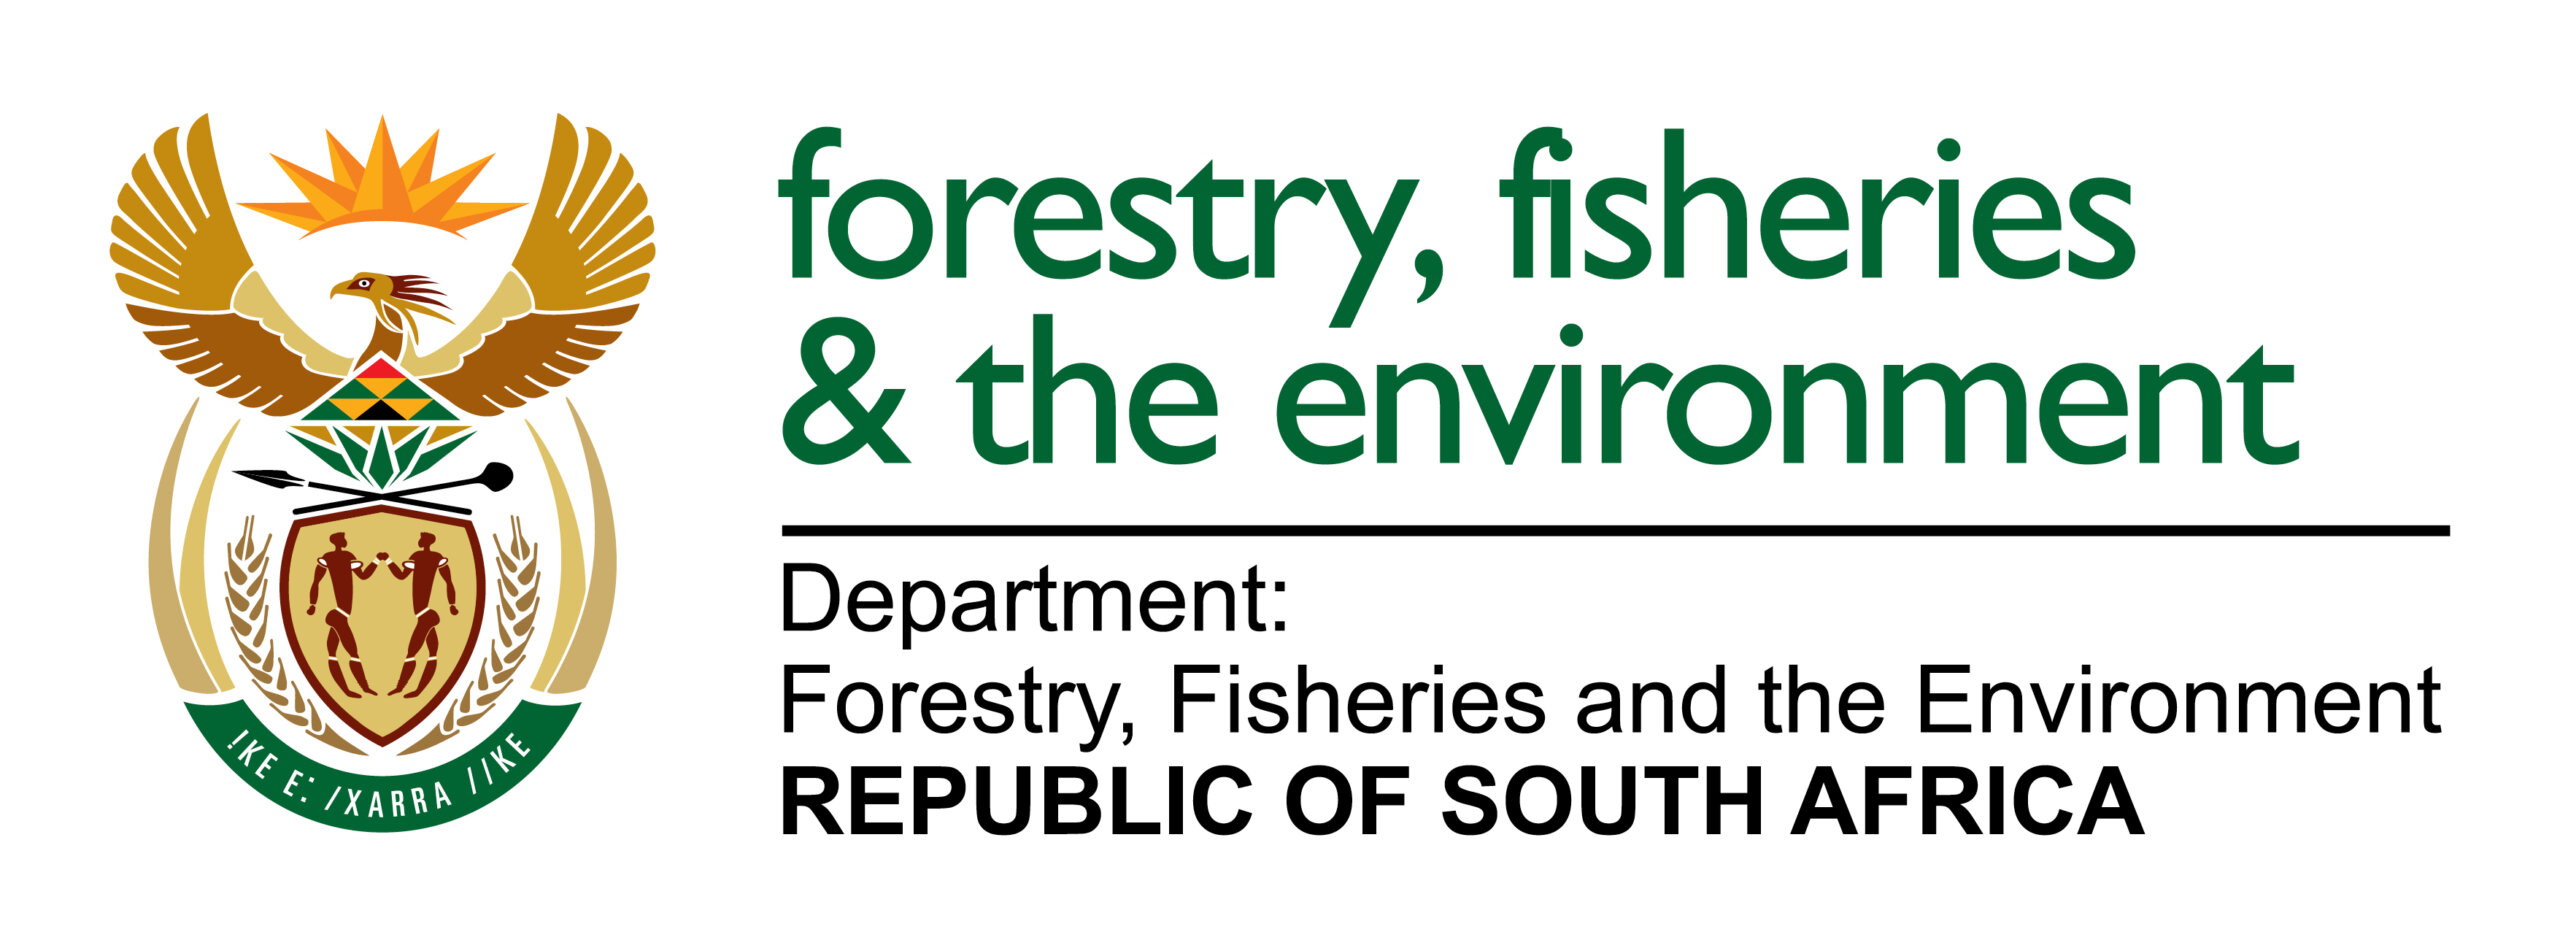 Department of Forestry, Fisheries & The Environment